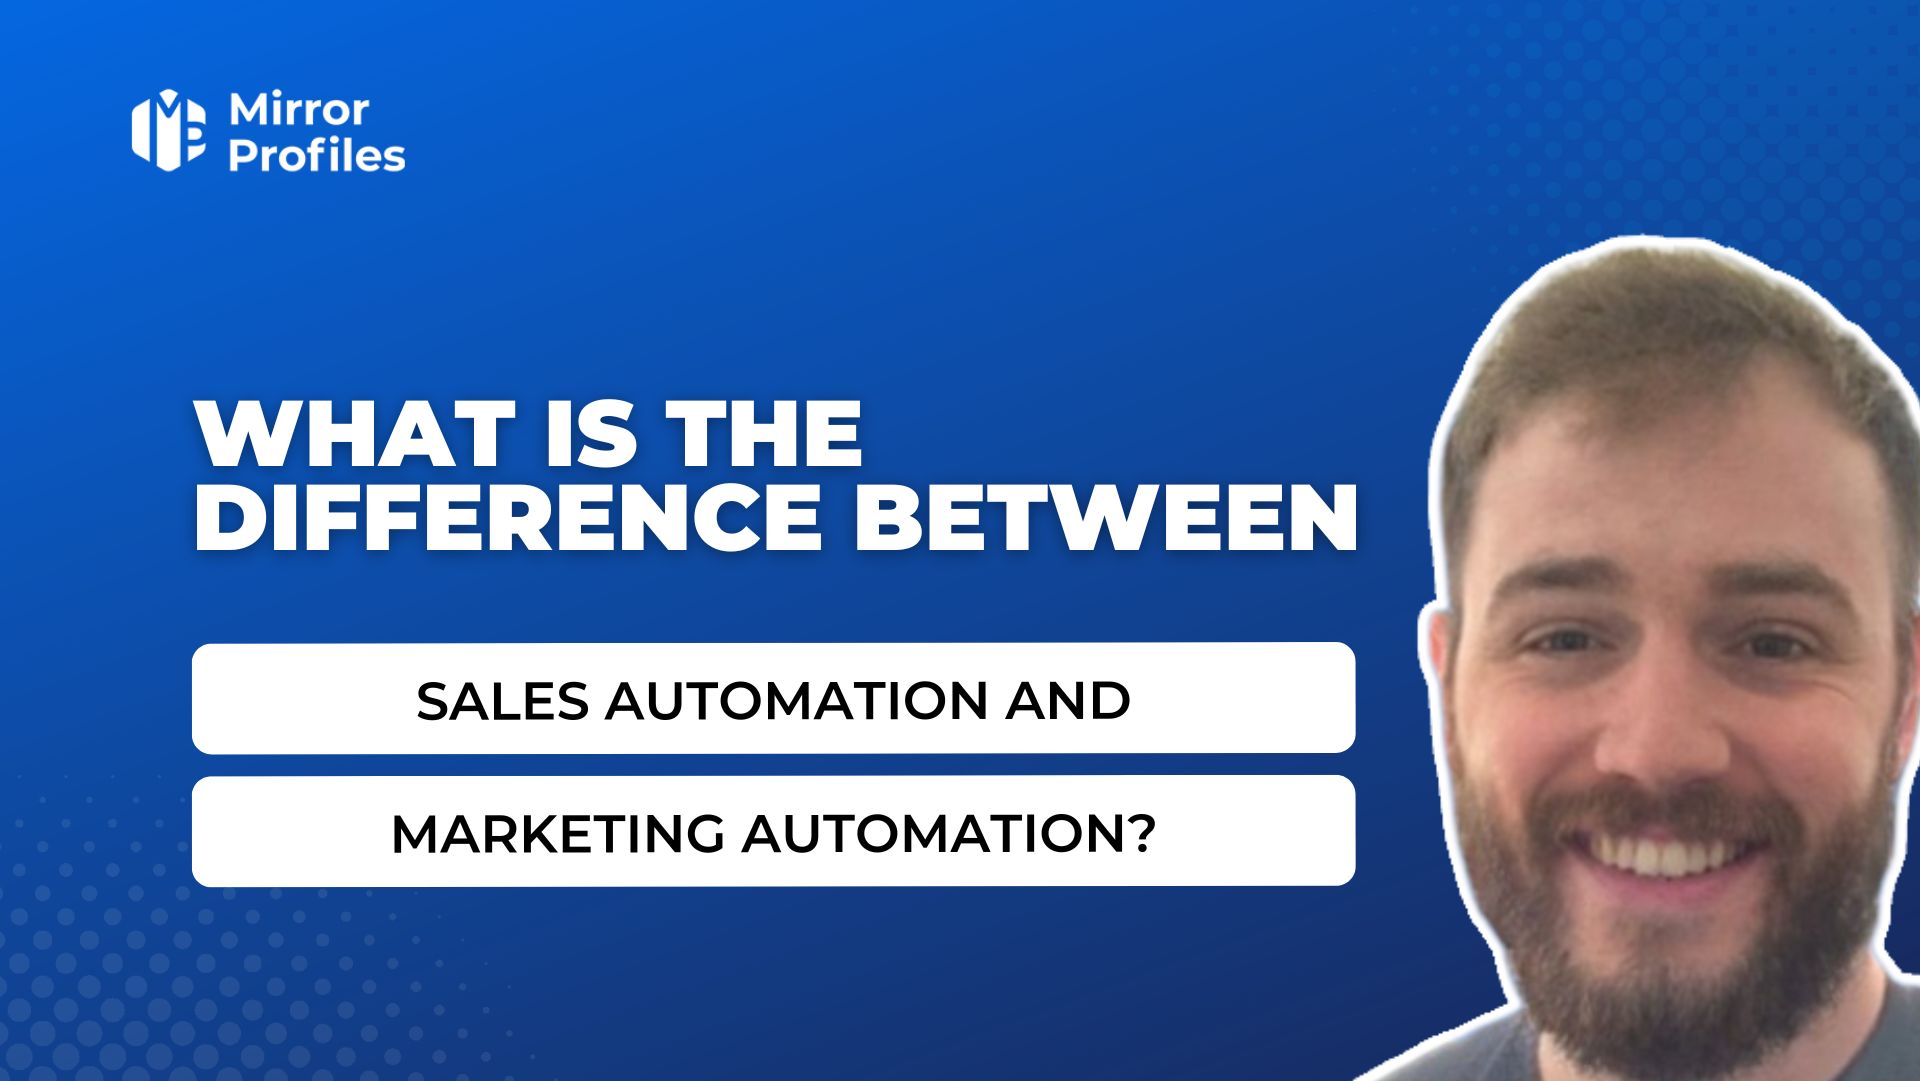 What is the difference between sales automation and marketing automation?